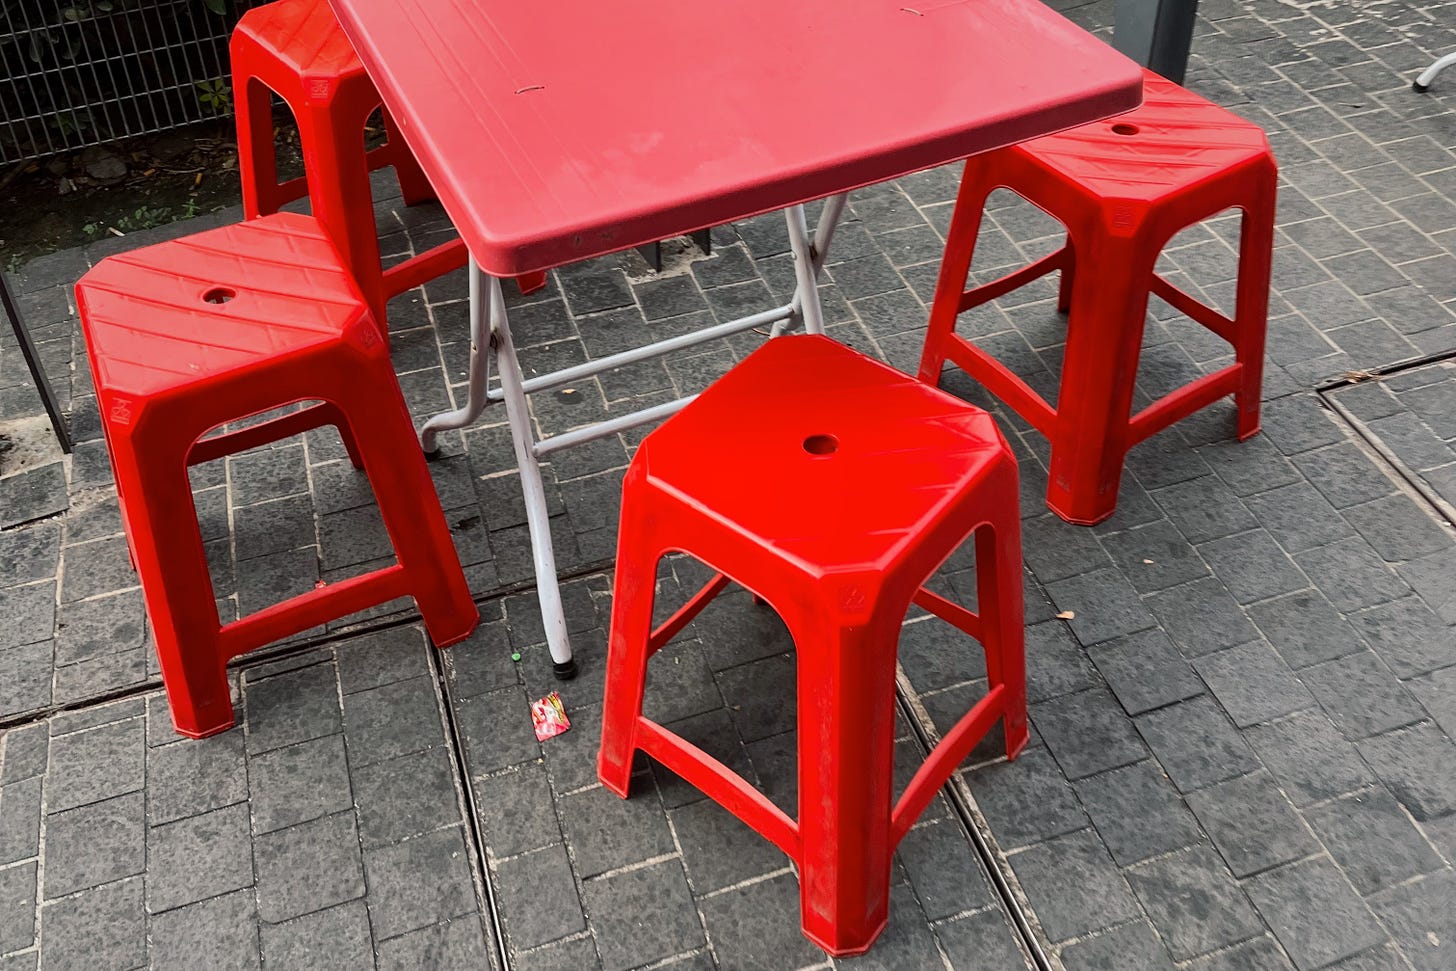 a red fold-out table on a grey-paved street, surrounded by four red plastic stools. the photograph is taken in passing, at a high angle, with no other background details apparent